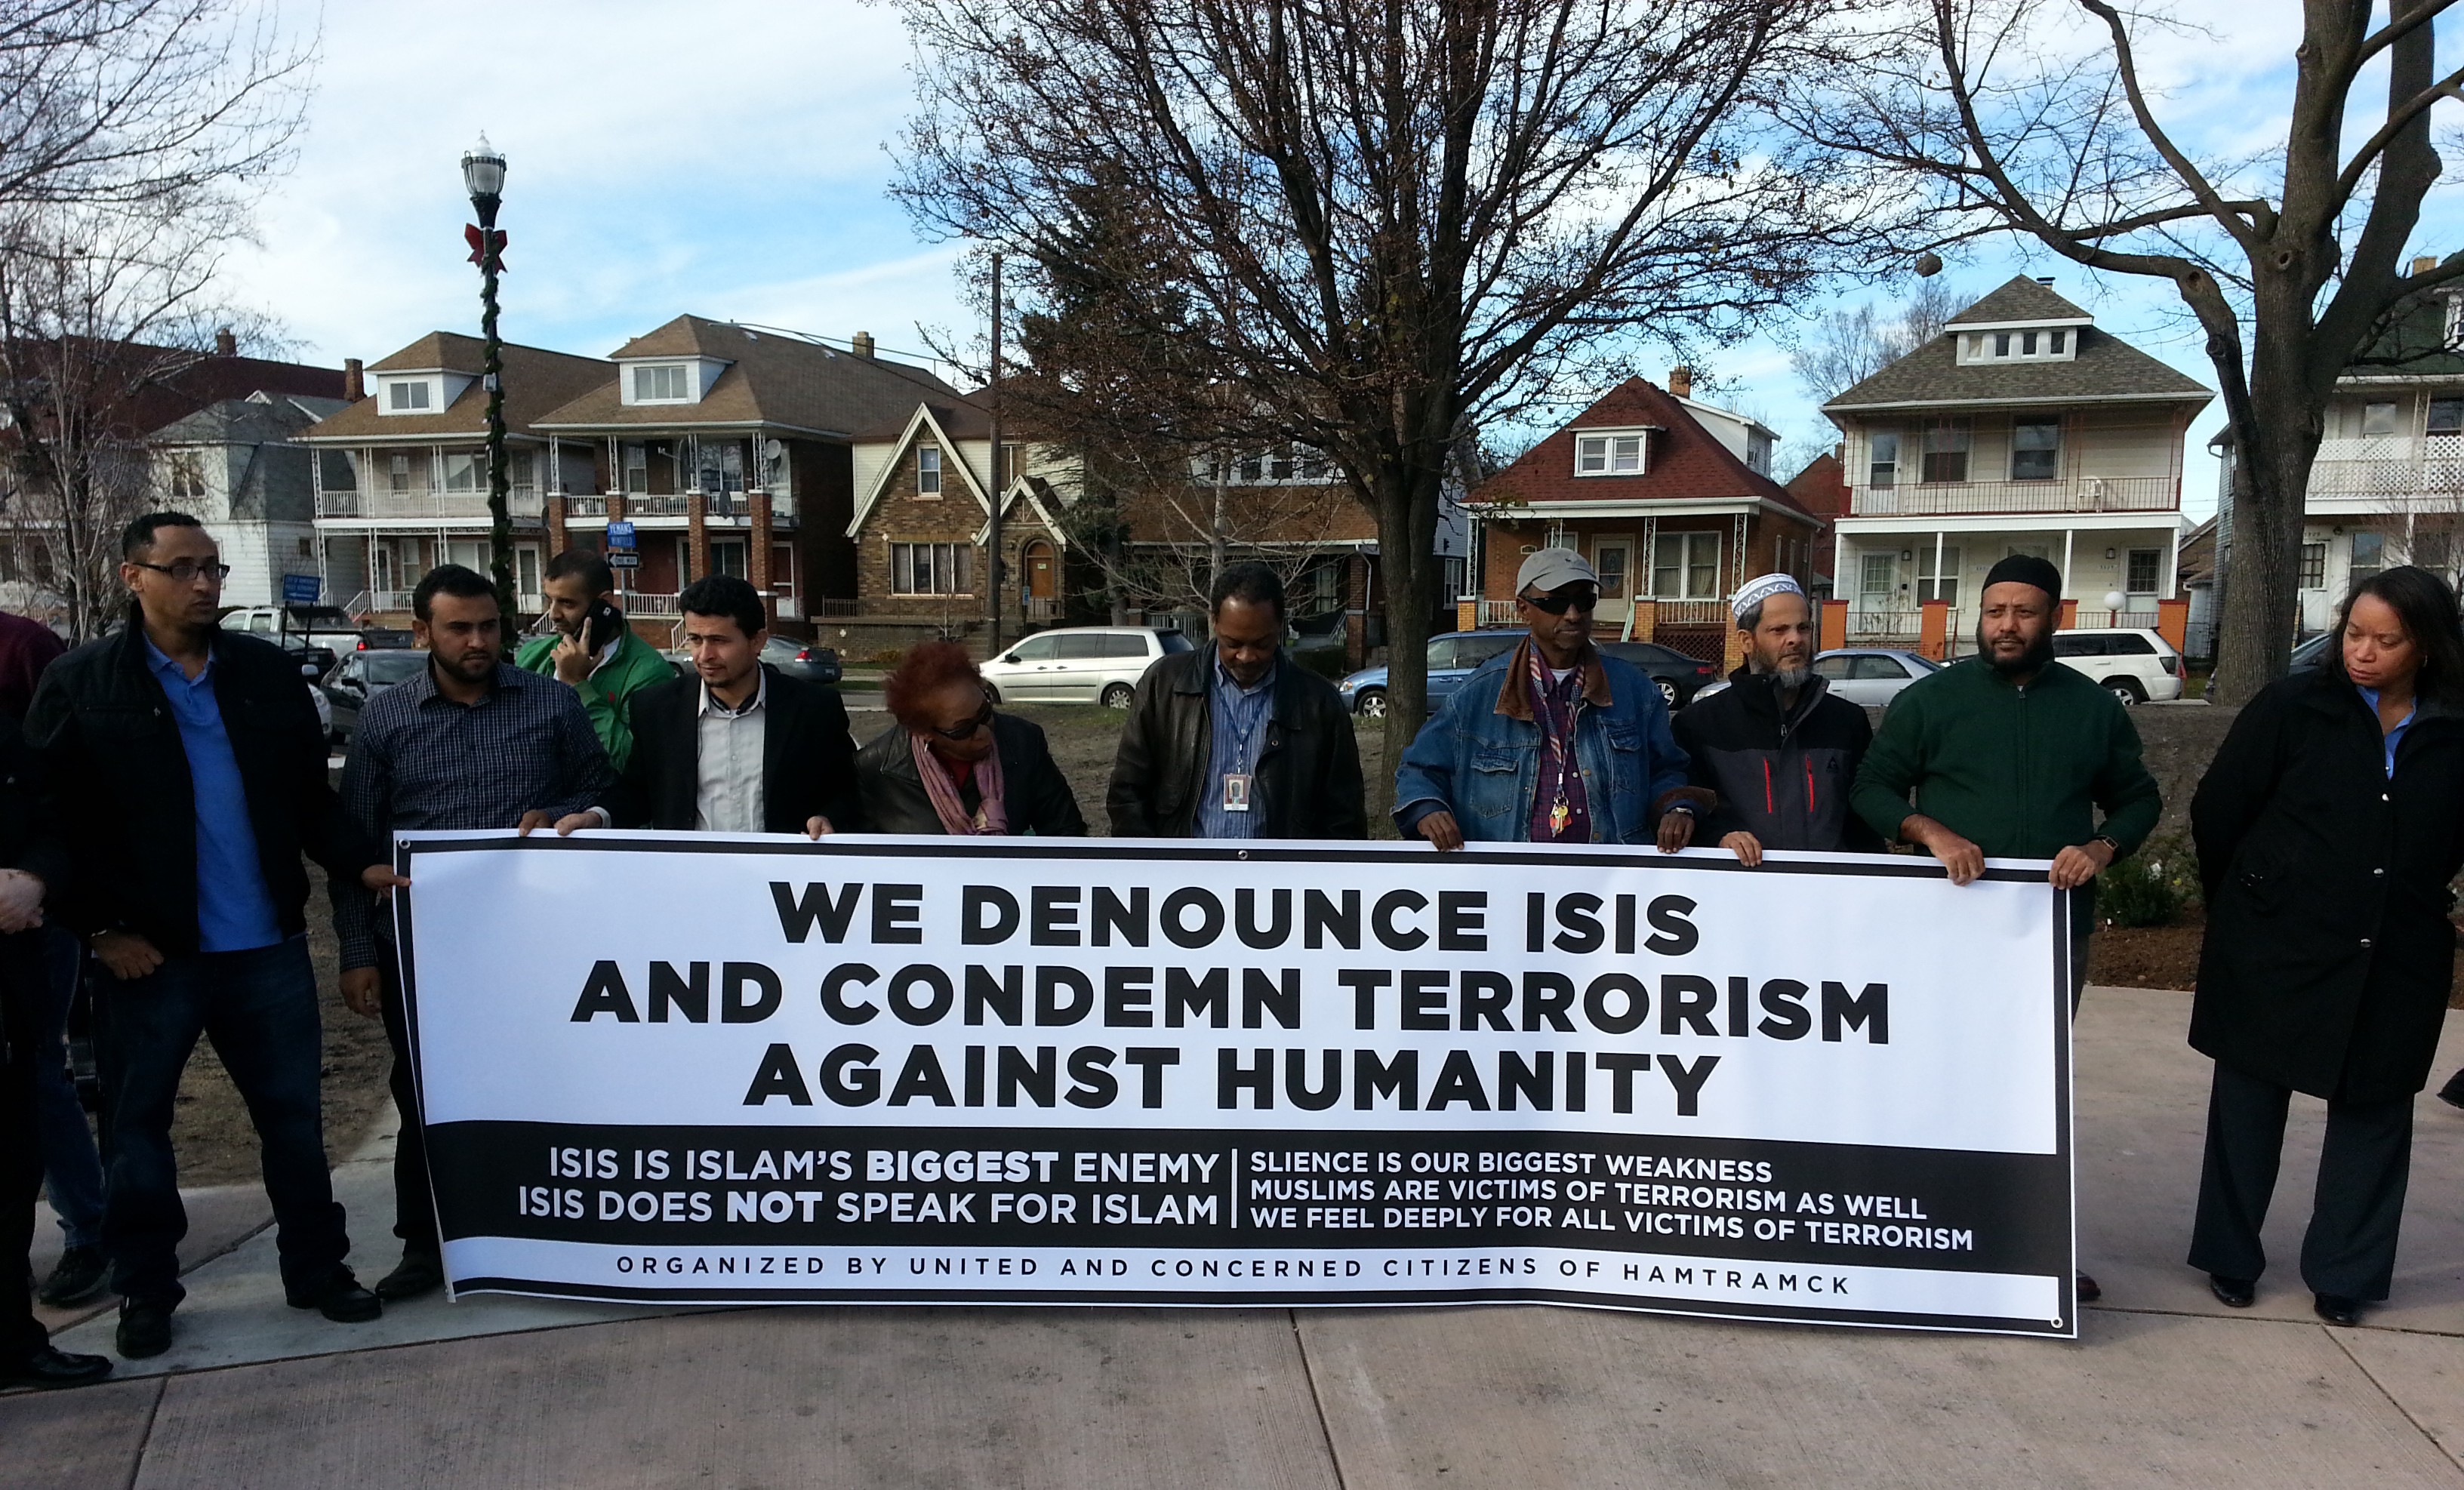 Residents of the greater Hamtramck area gather to speak out against ISIS. (credit: Jon Hewett)